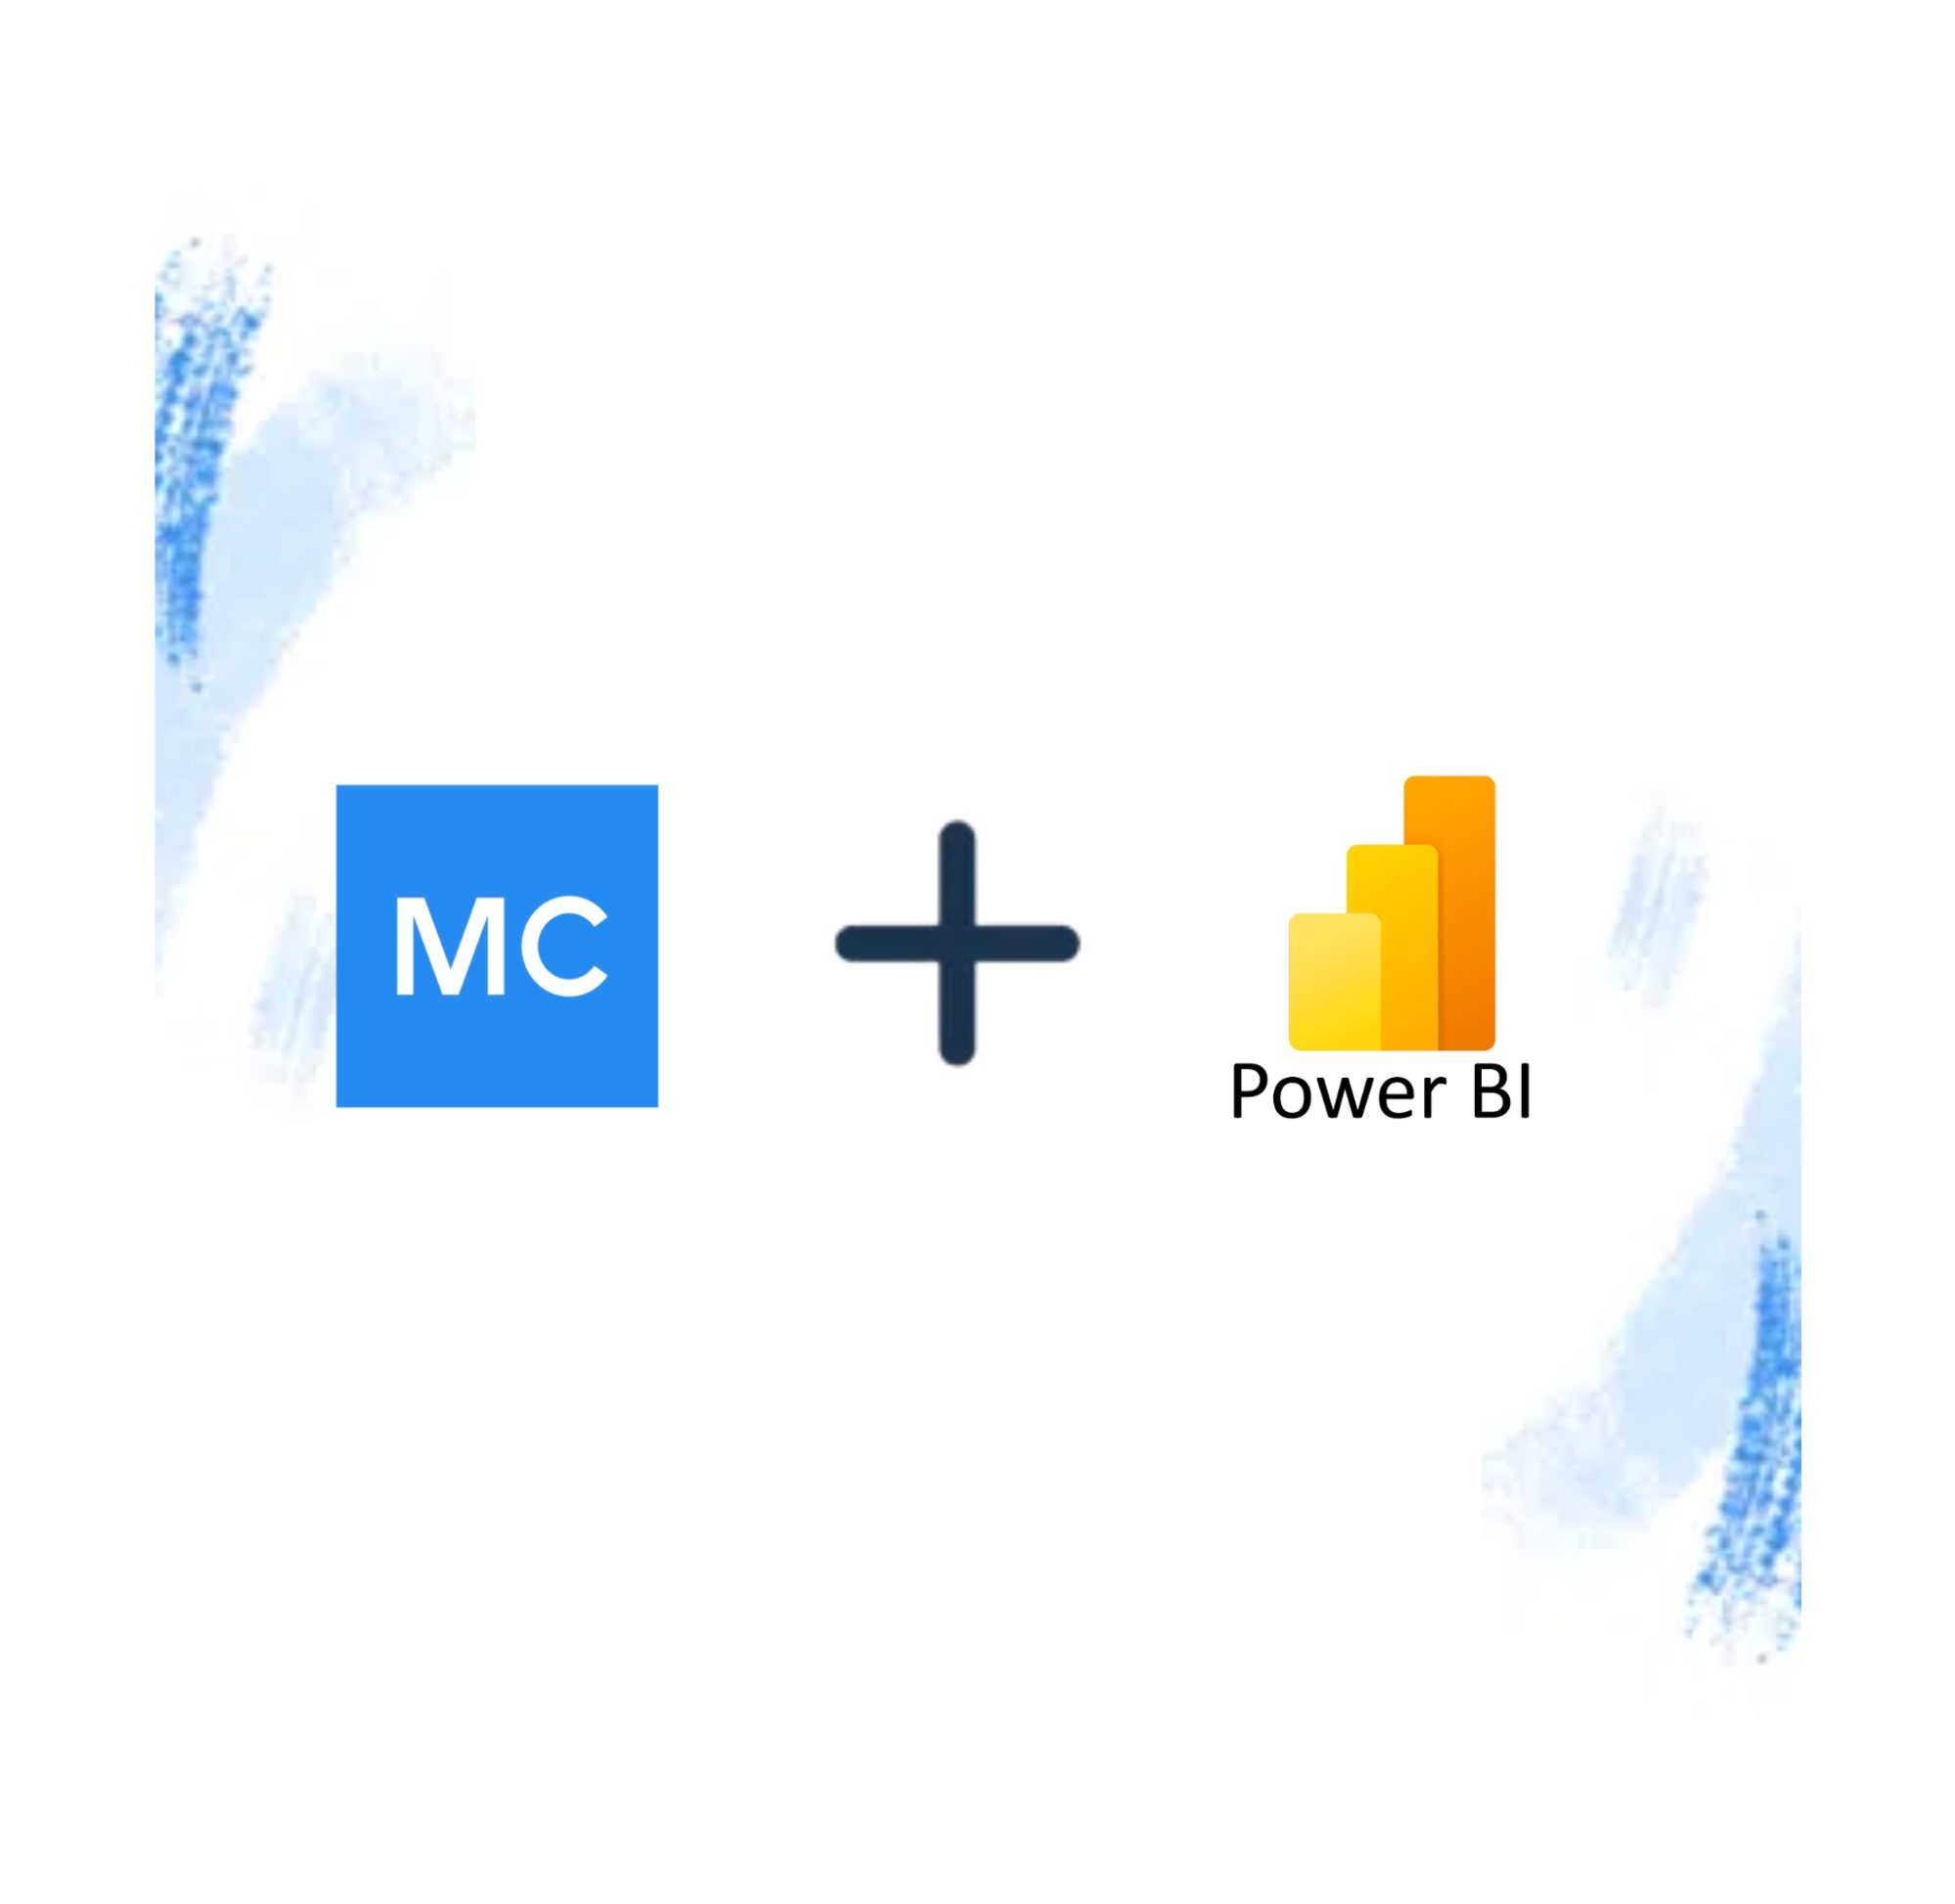 Monte Carlo Announces Power BI Integration to Help Data Teams Triage and Prevent Data Incidents at Scale